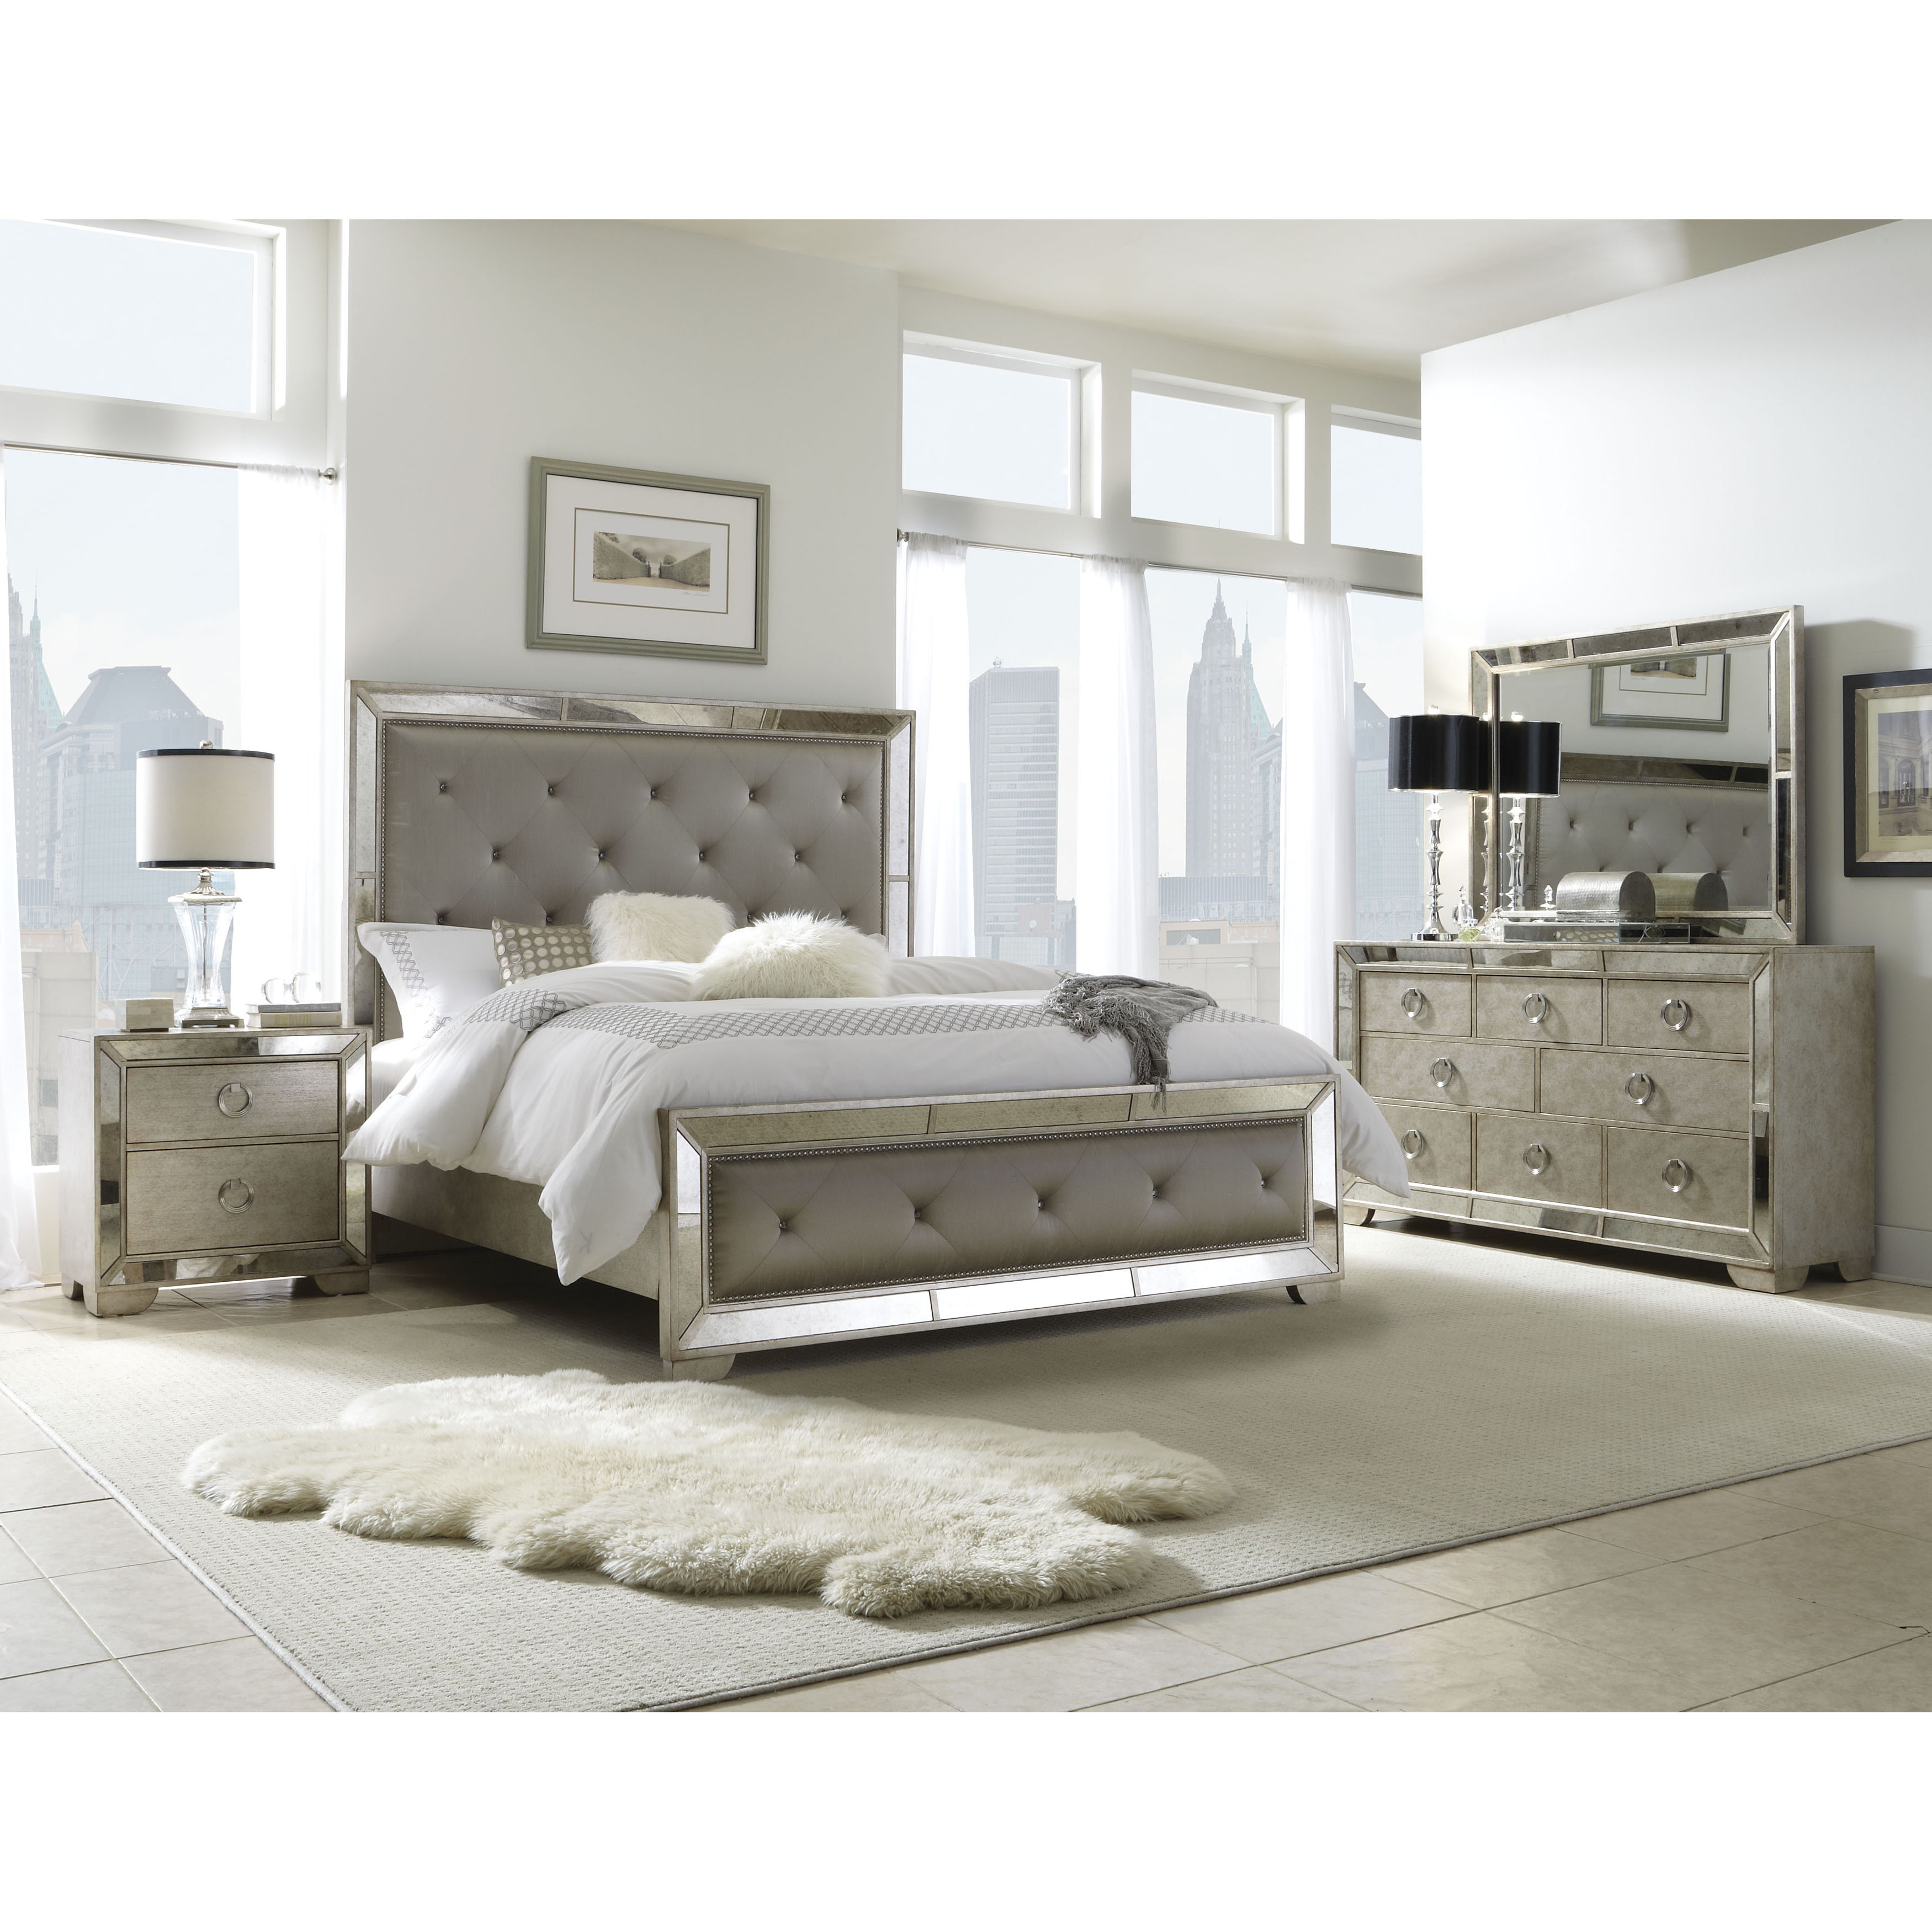 bedroom furniture sets with mattress photo - 9